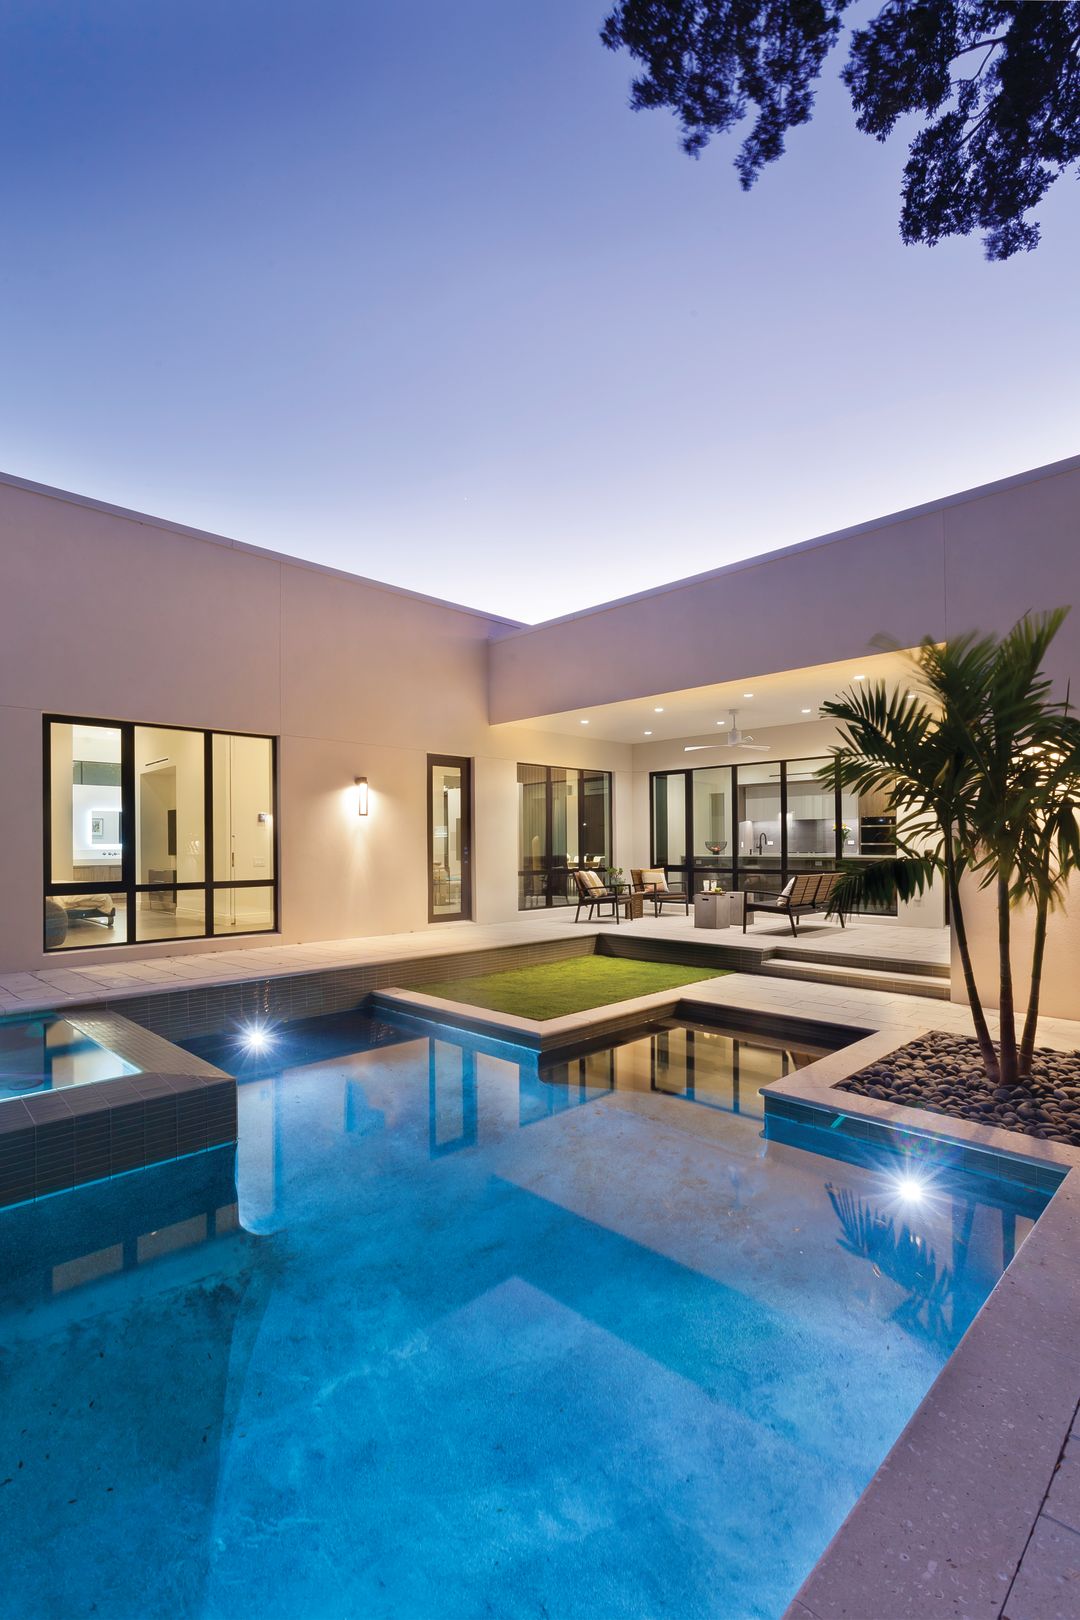 A new, geometric-shaped pool and seating area extend the modern design.